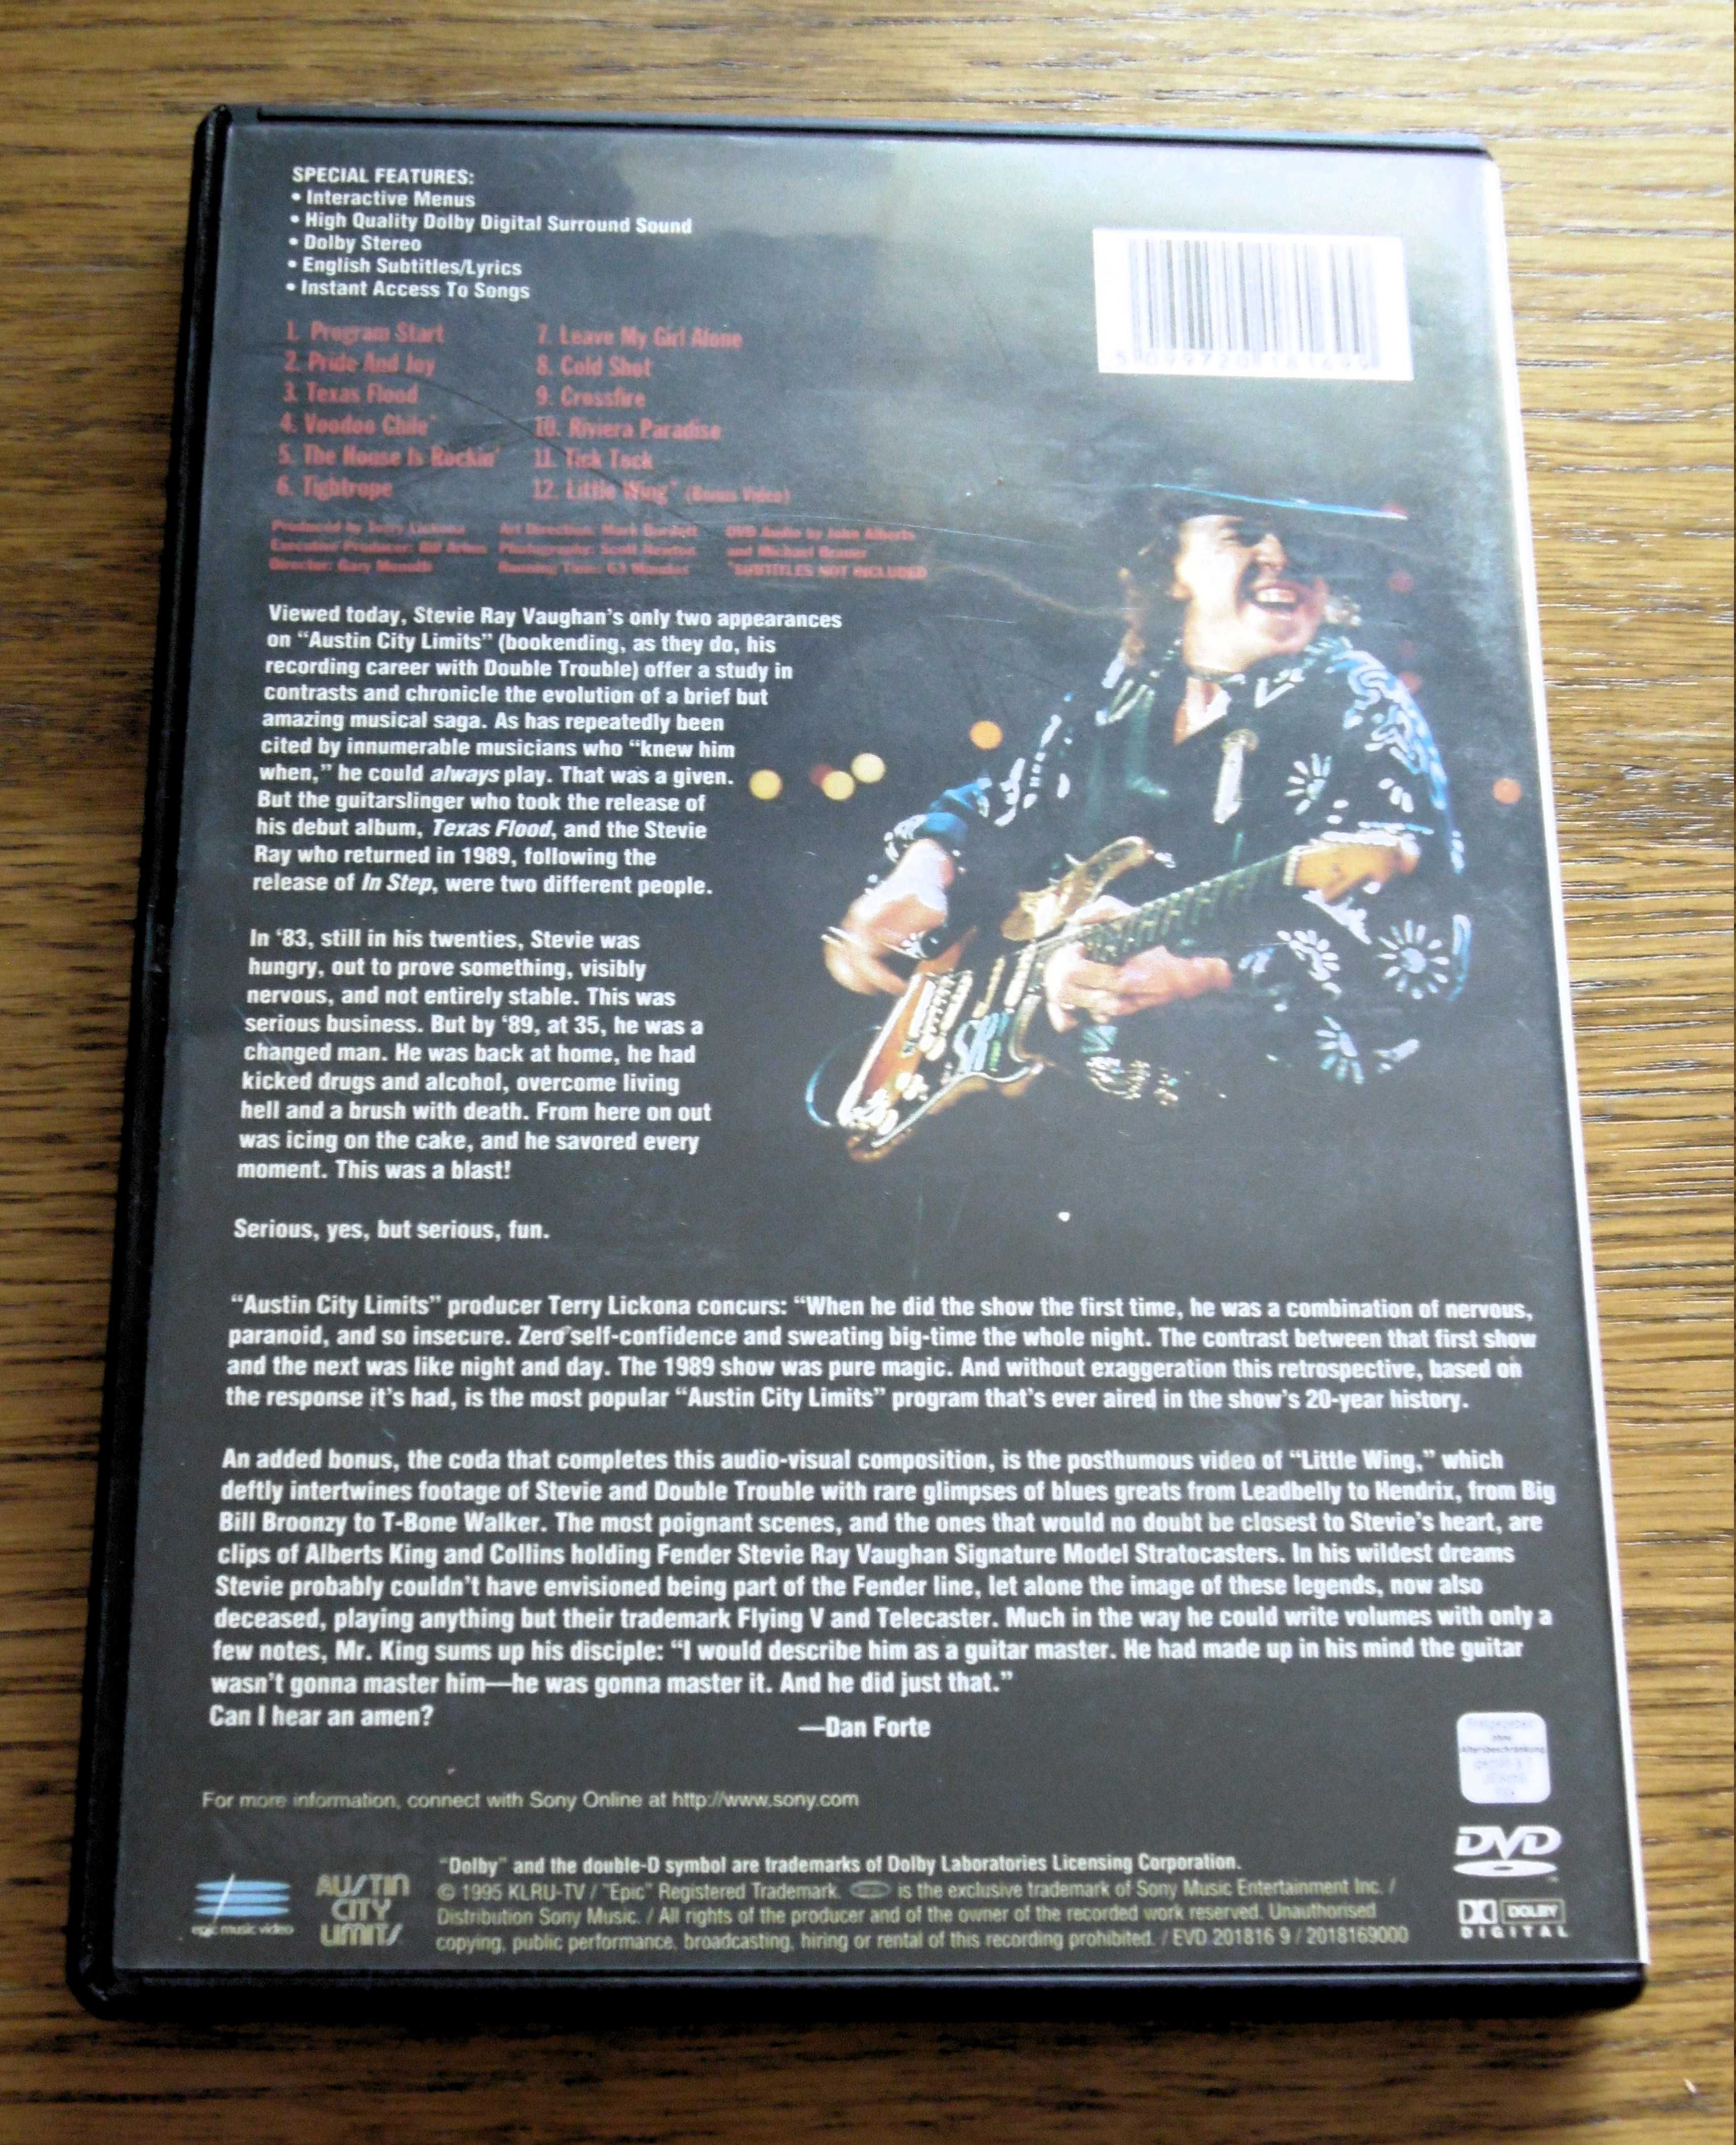 DVD Stevie Ray Vaughan Double Trouble koncerty unikaty!